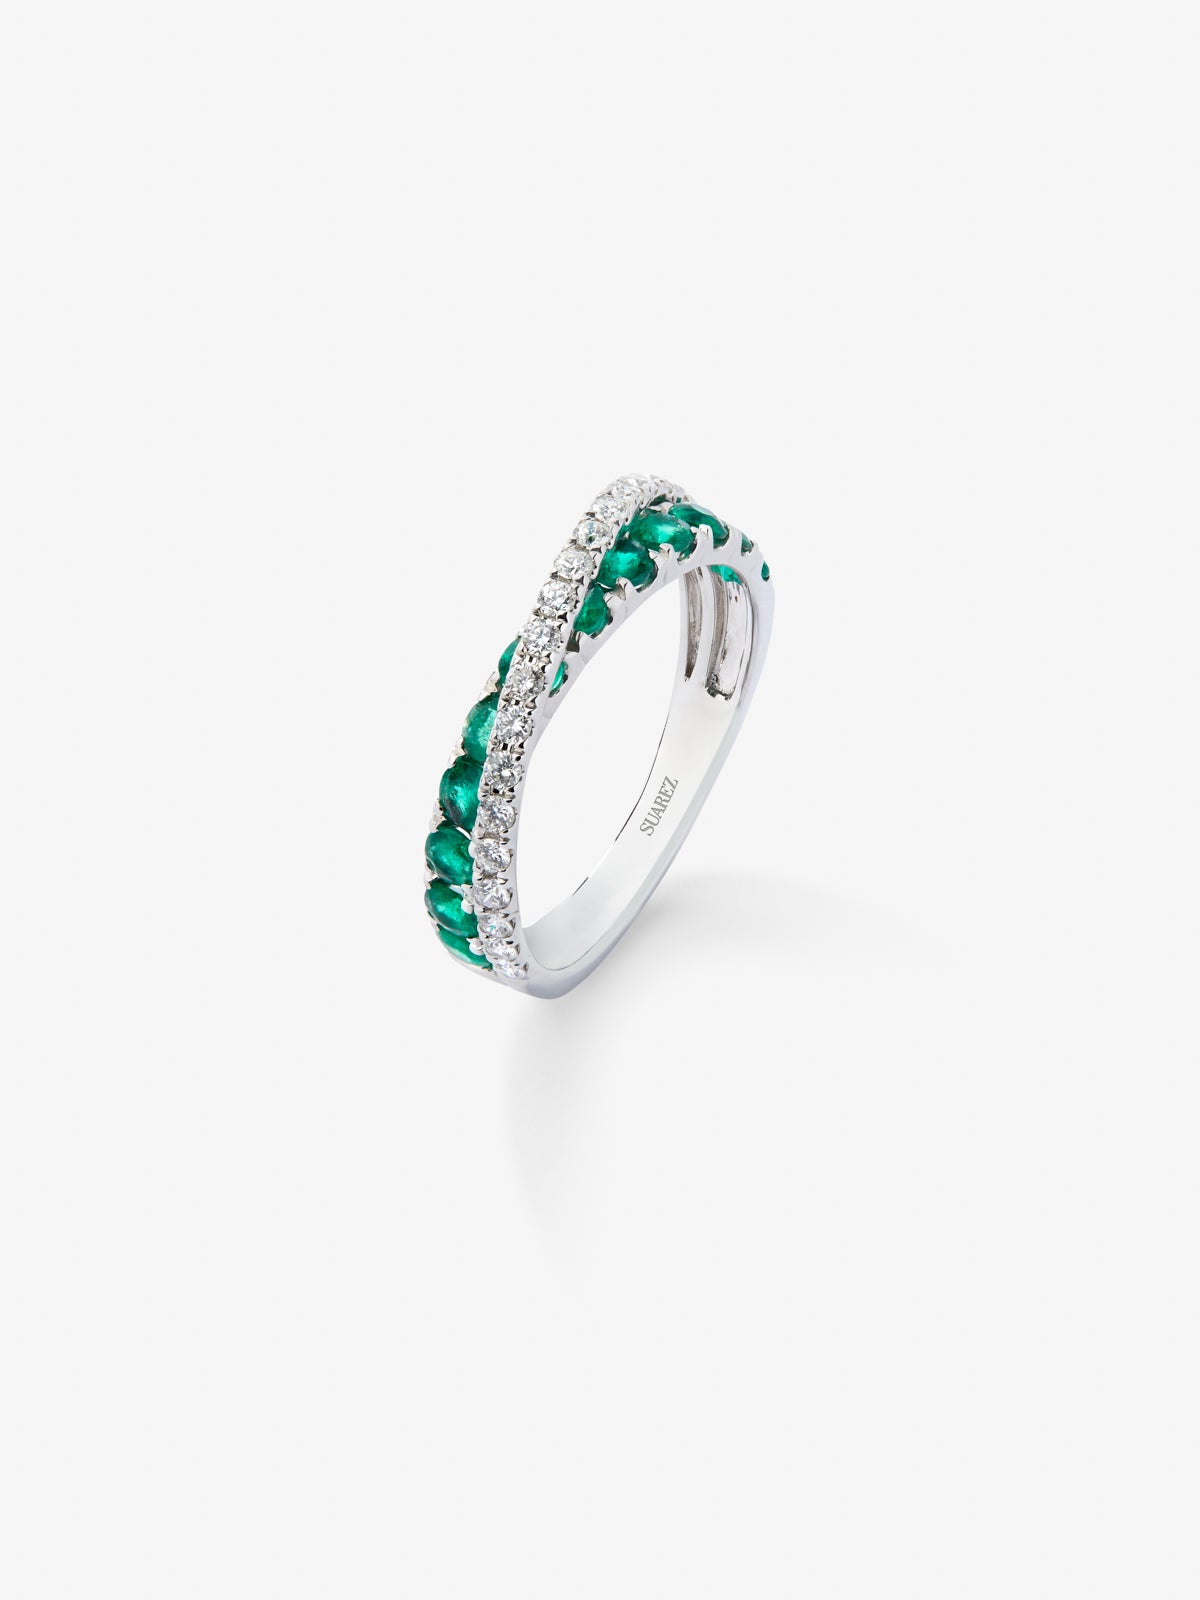 18K white gold cross ring with 12 brilliant-cut emeralds with a total of 0.62 cts and 20 brilliant-cut diamonds with a total of 0.2 cts